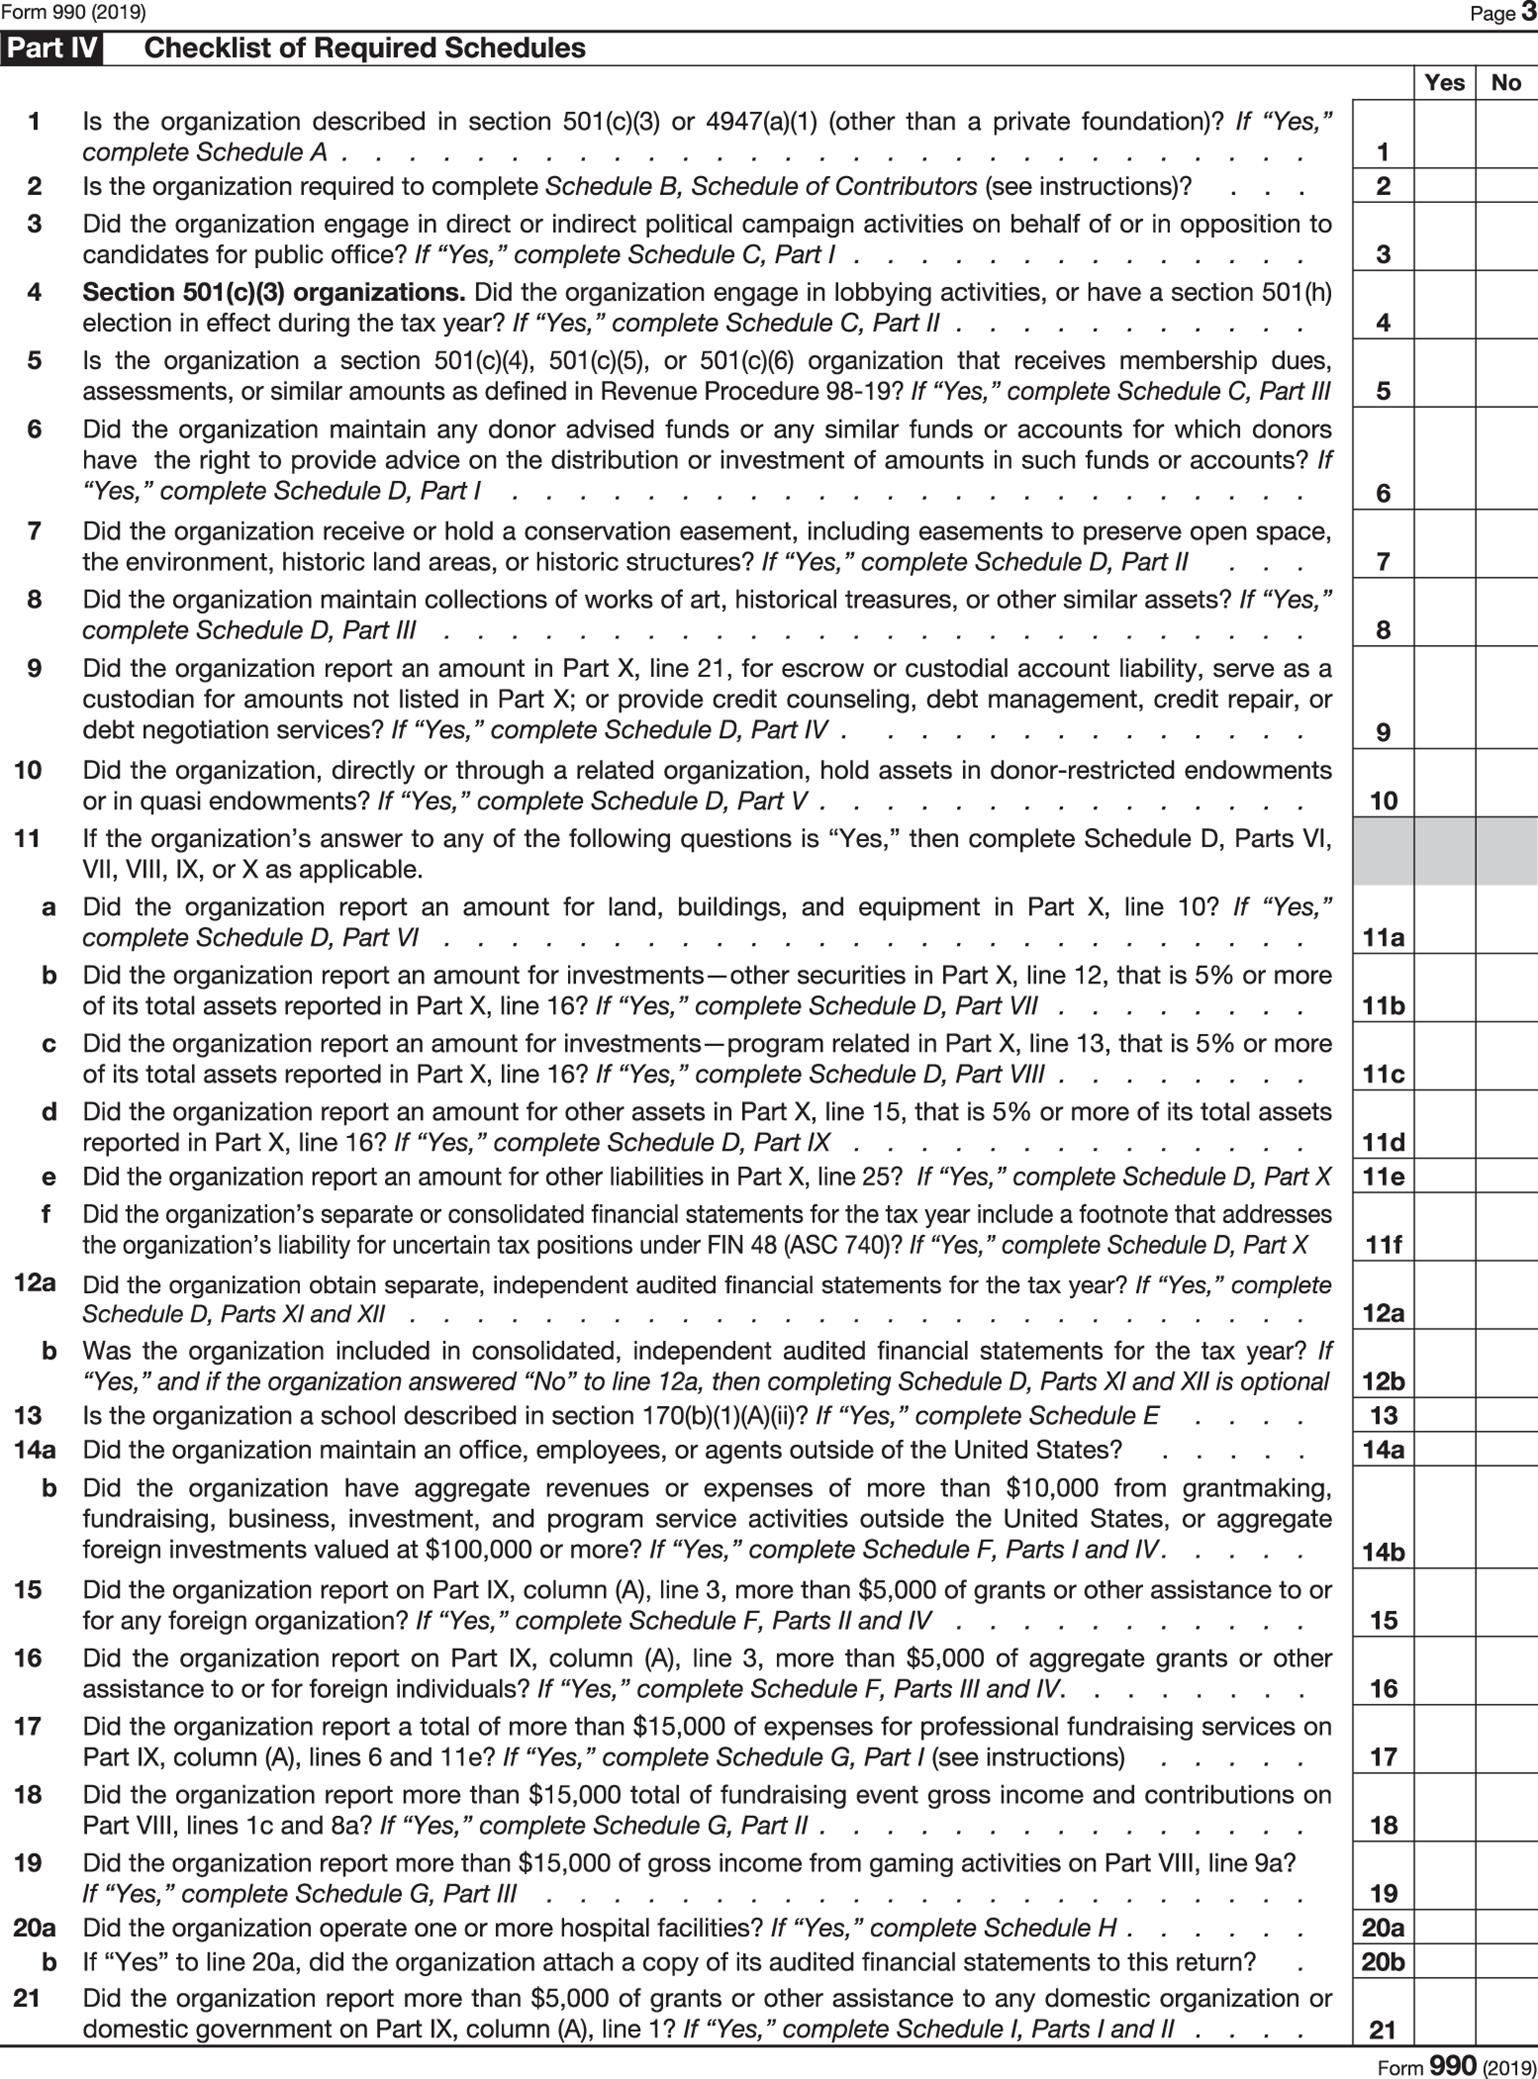 Page 3 of Exhibit 2: Form 990, Part IV, displaying the checklist of required schedules, to be filled in, for the calendar year 2018.